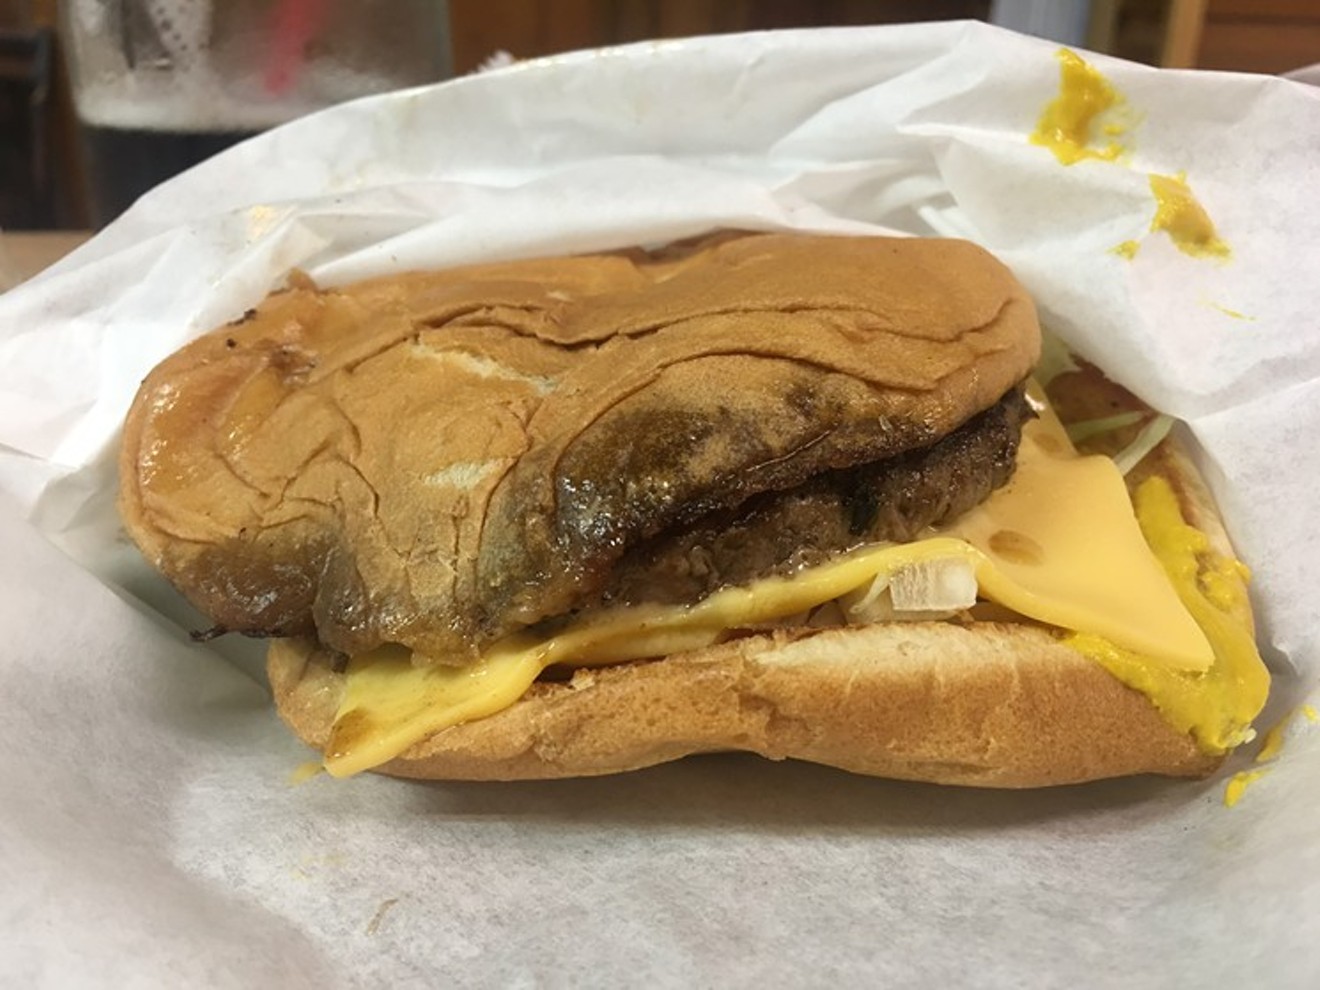 It may not look like much, but Dairy-Ette’s burger is an essential part of the Dallas food scene.